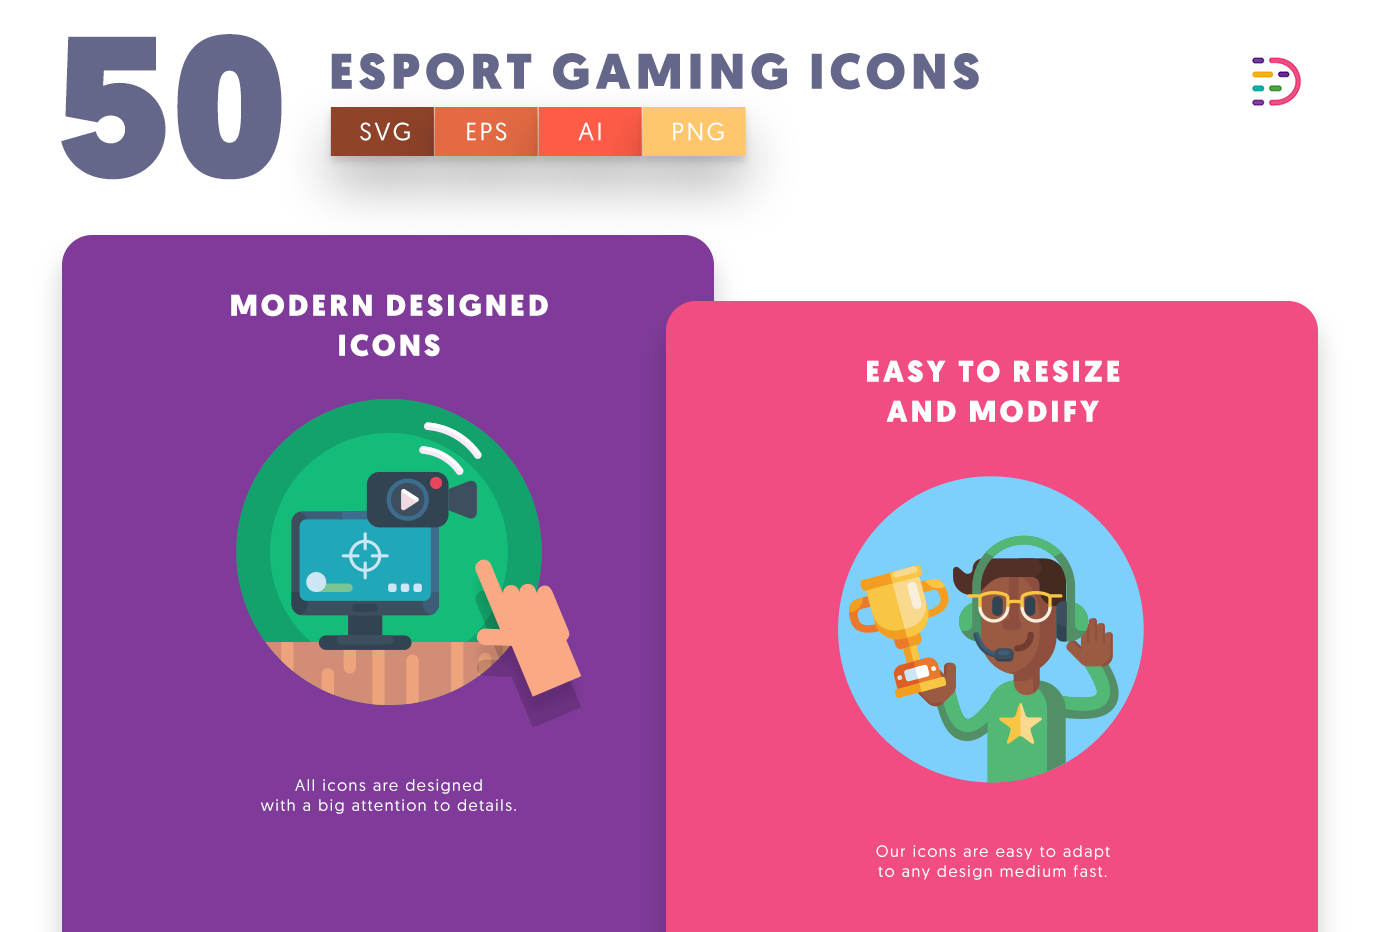 Esport Gaming icons png/svg/eps